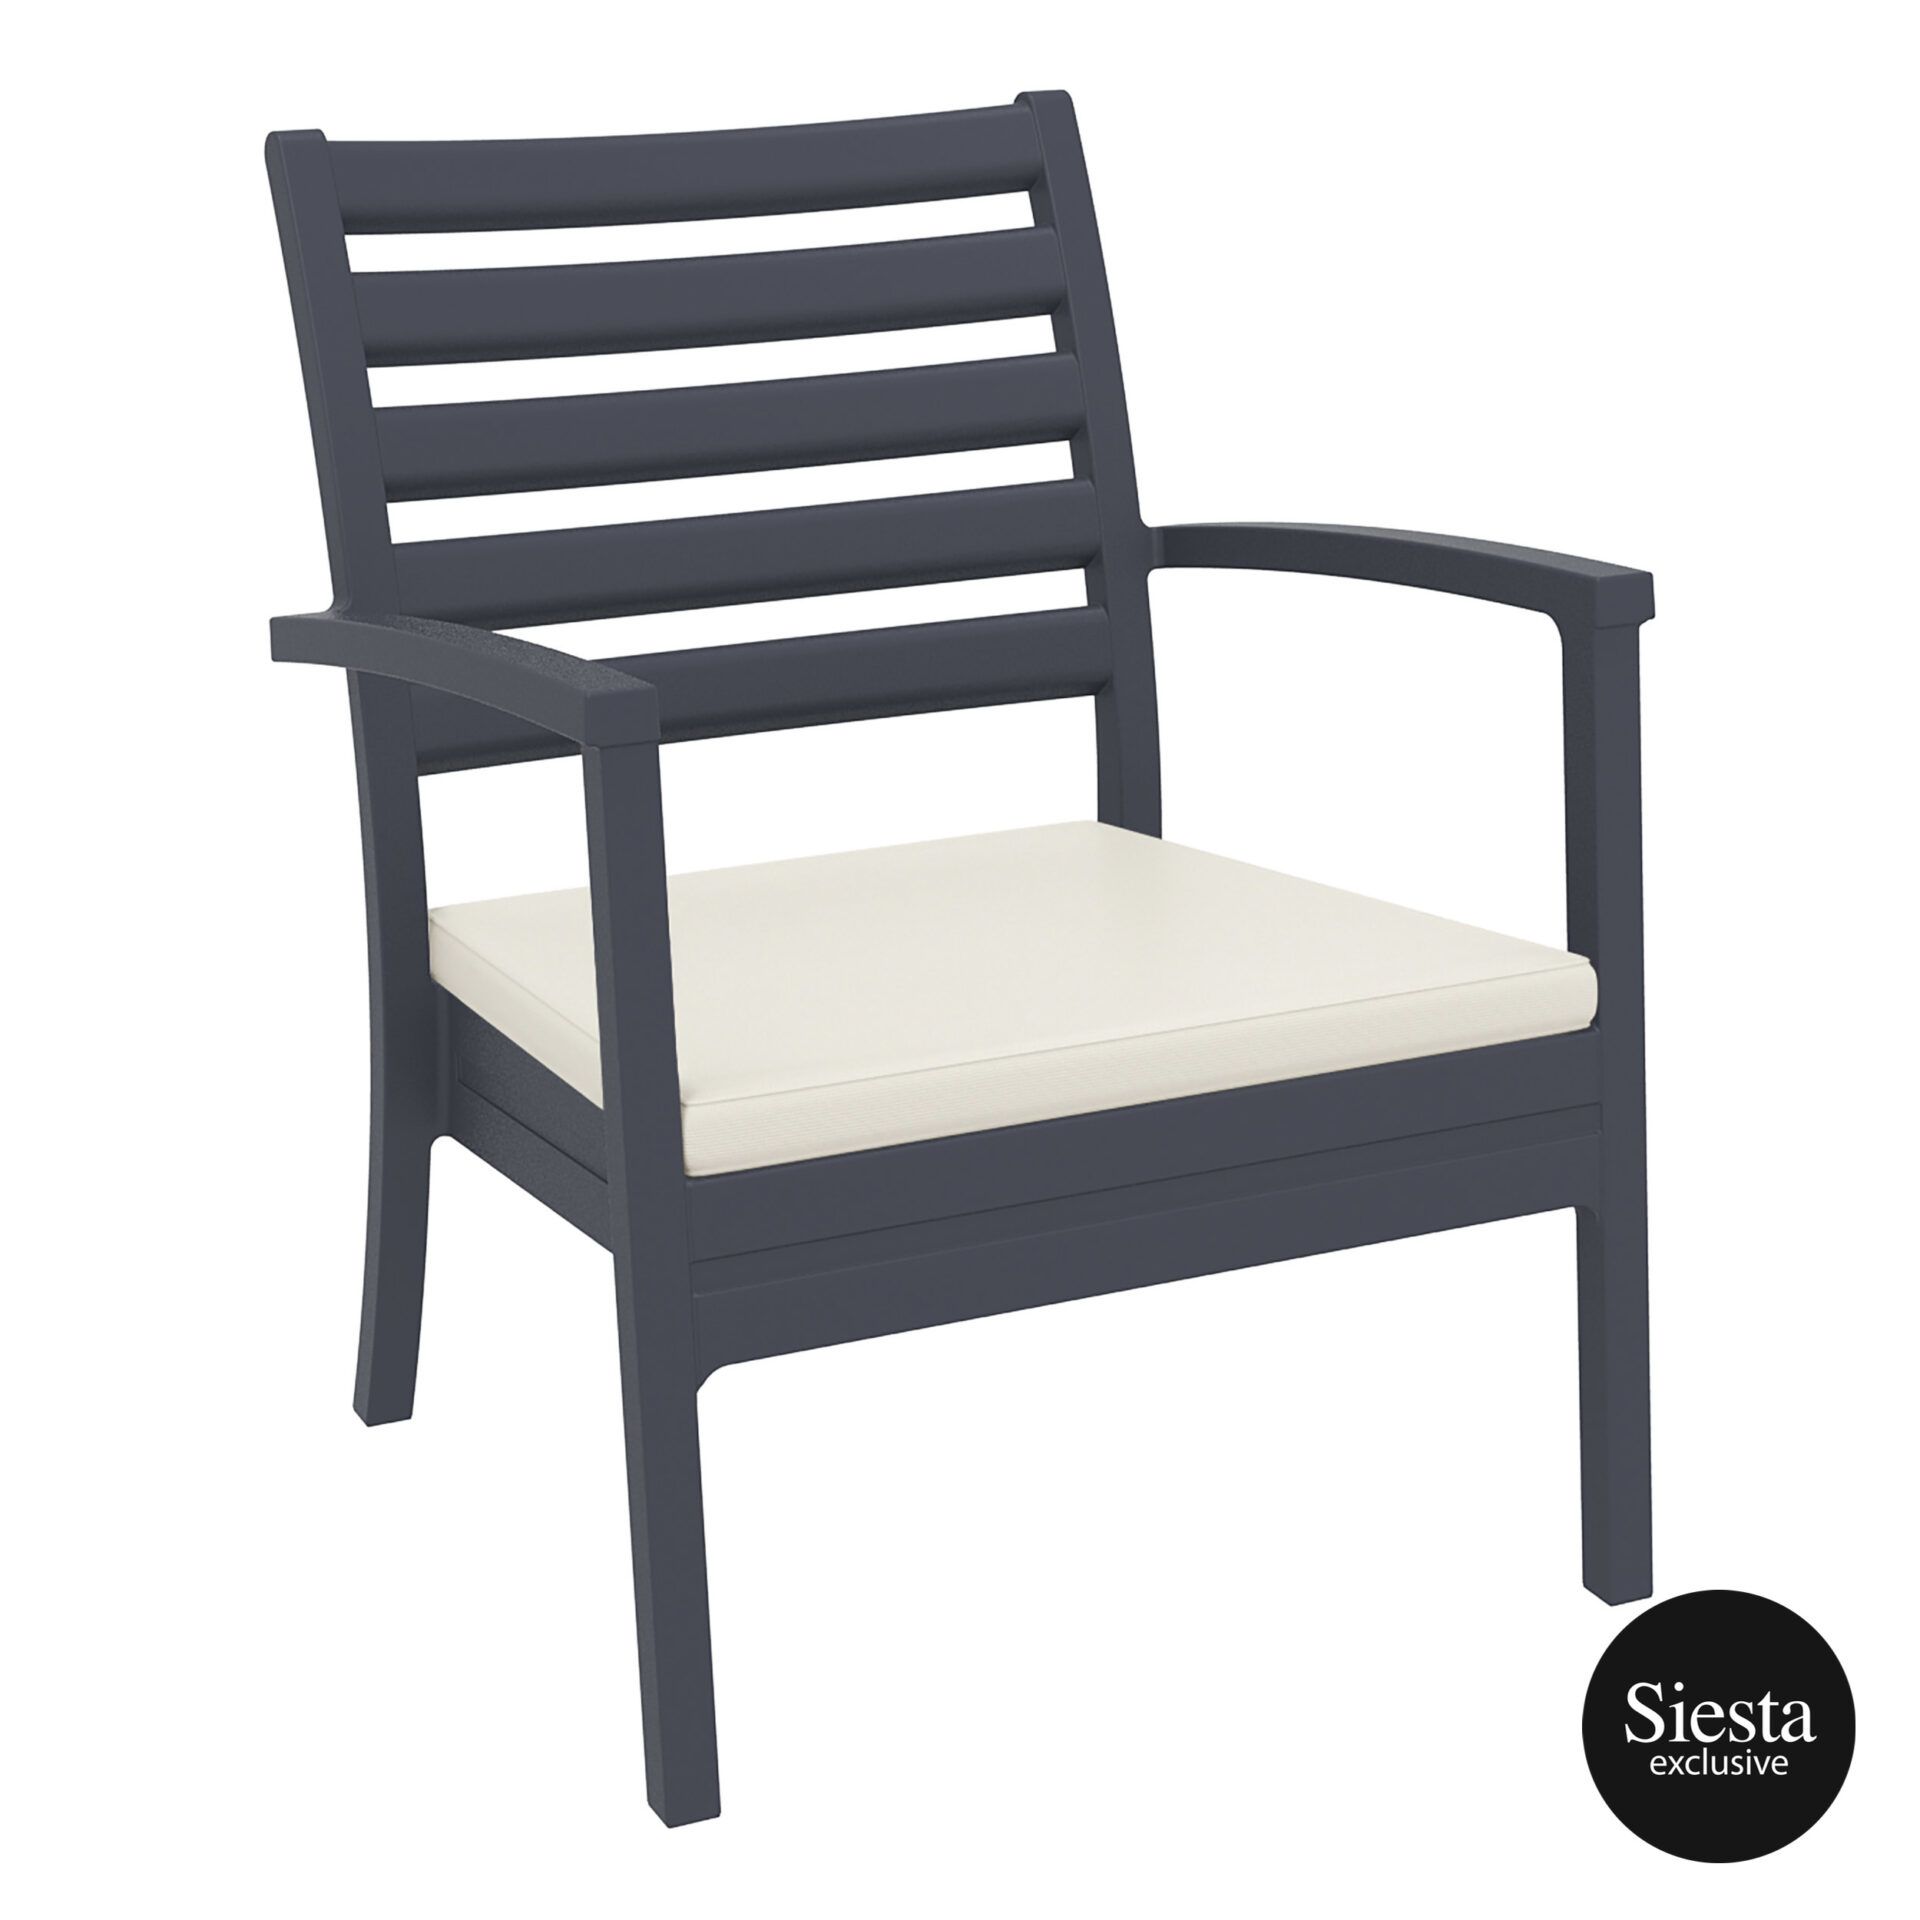 Artemis XL Armchair - Anthracite with Beige Seat Cushion